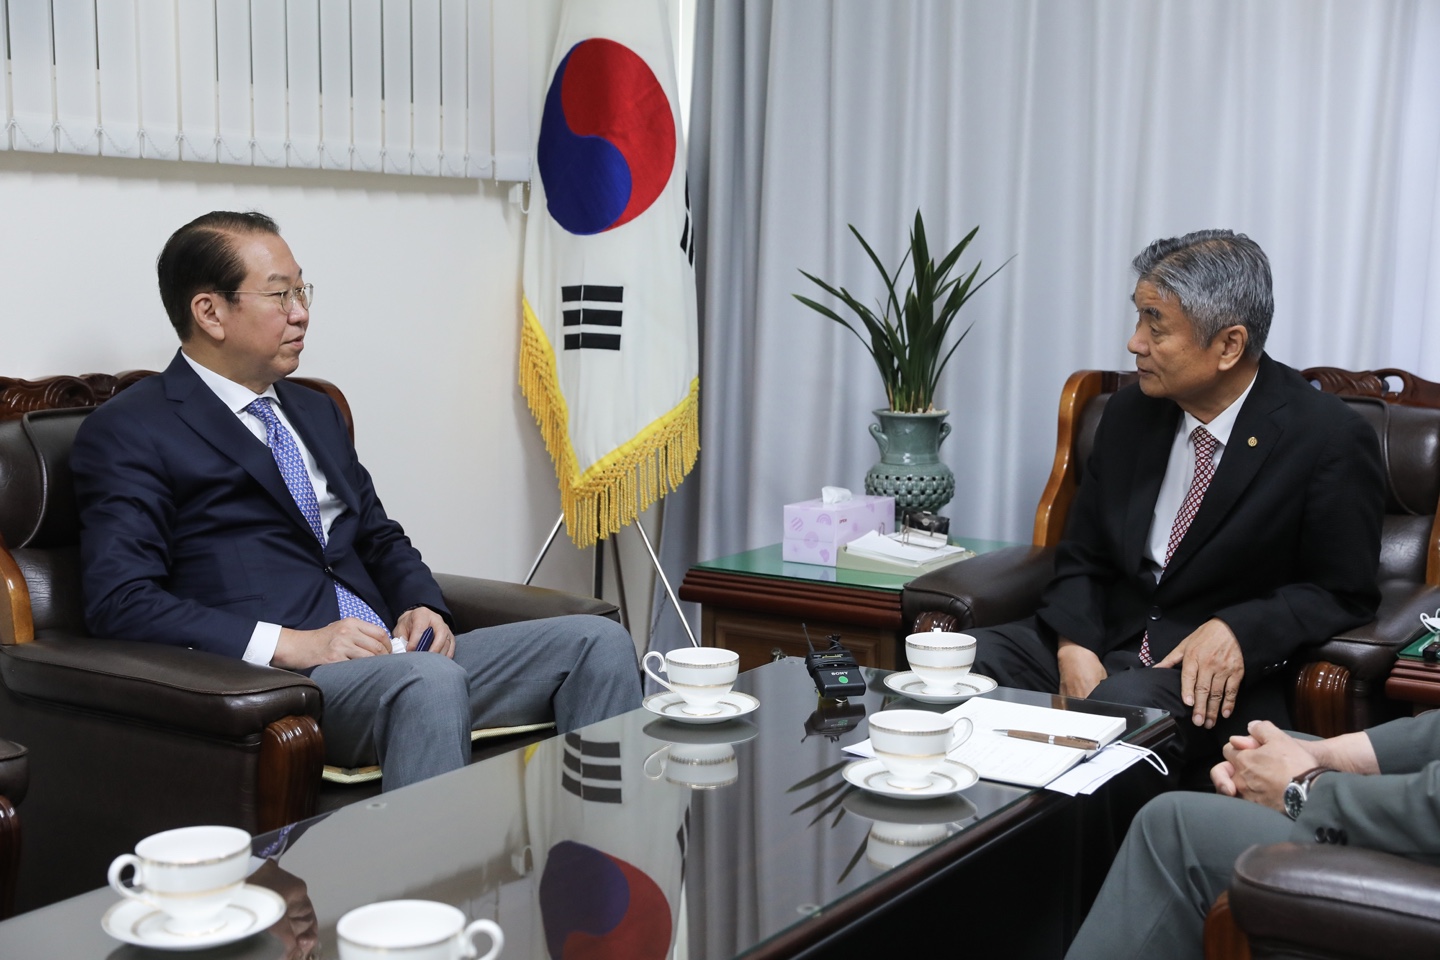 Unification Minister Kwon Youngse Pays Courtesy Visit to the Supreme Leader of Chondogyo Park Sang-Jong